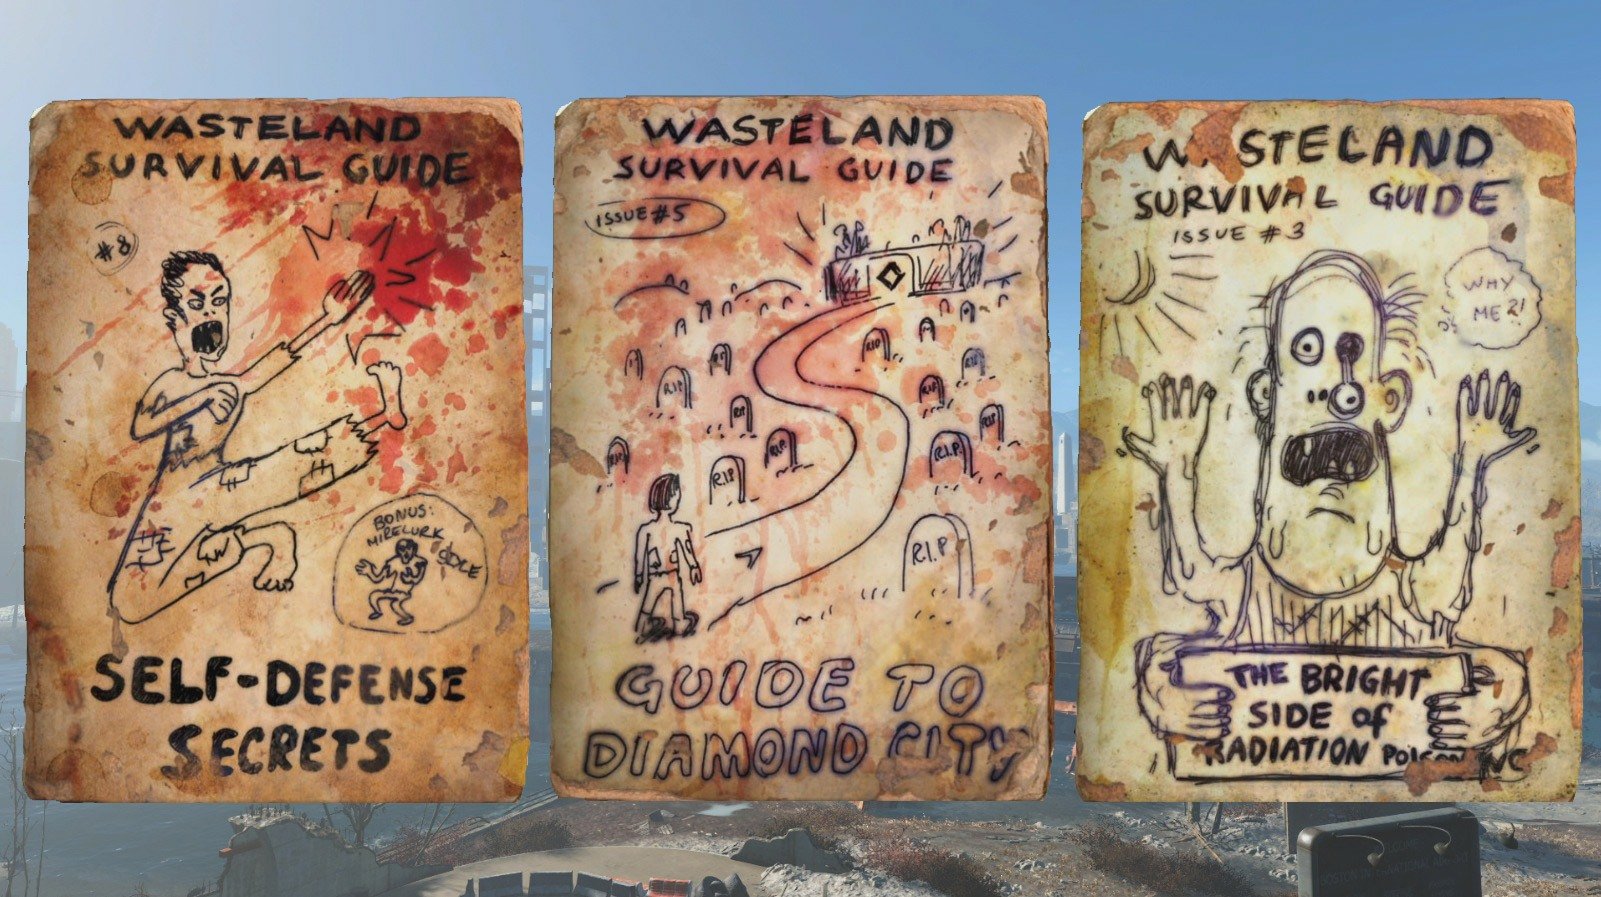 fallout-4-wasteland-survival-guide-fallout-4-comic-book-and-magazine-locations-guide-gamesradar